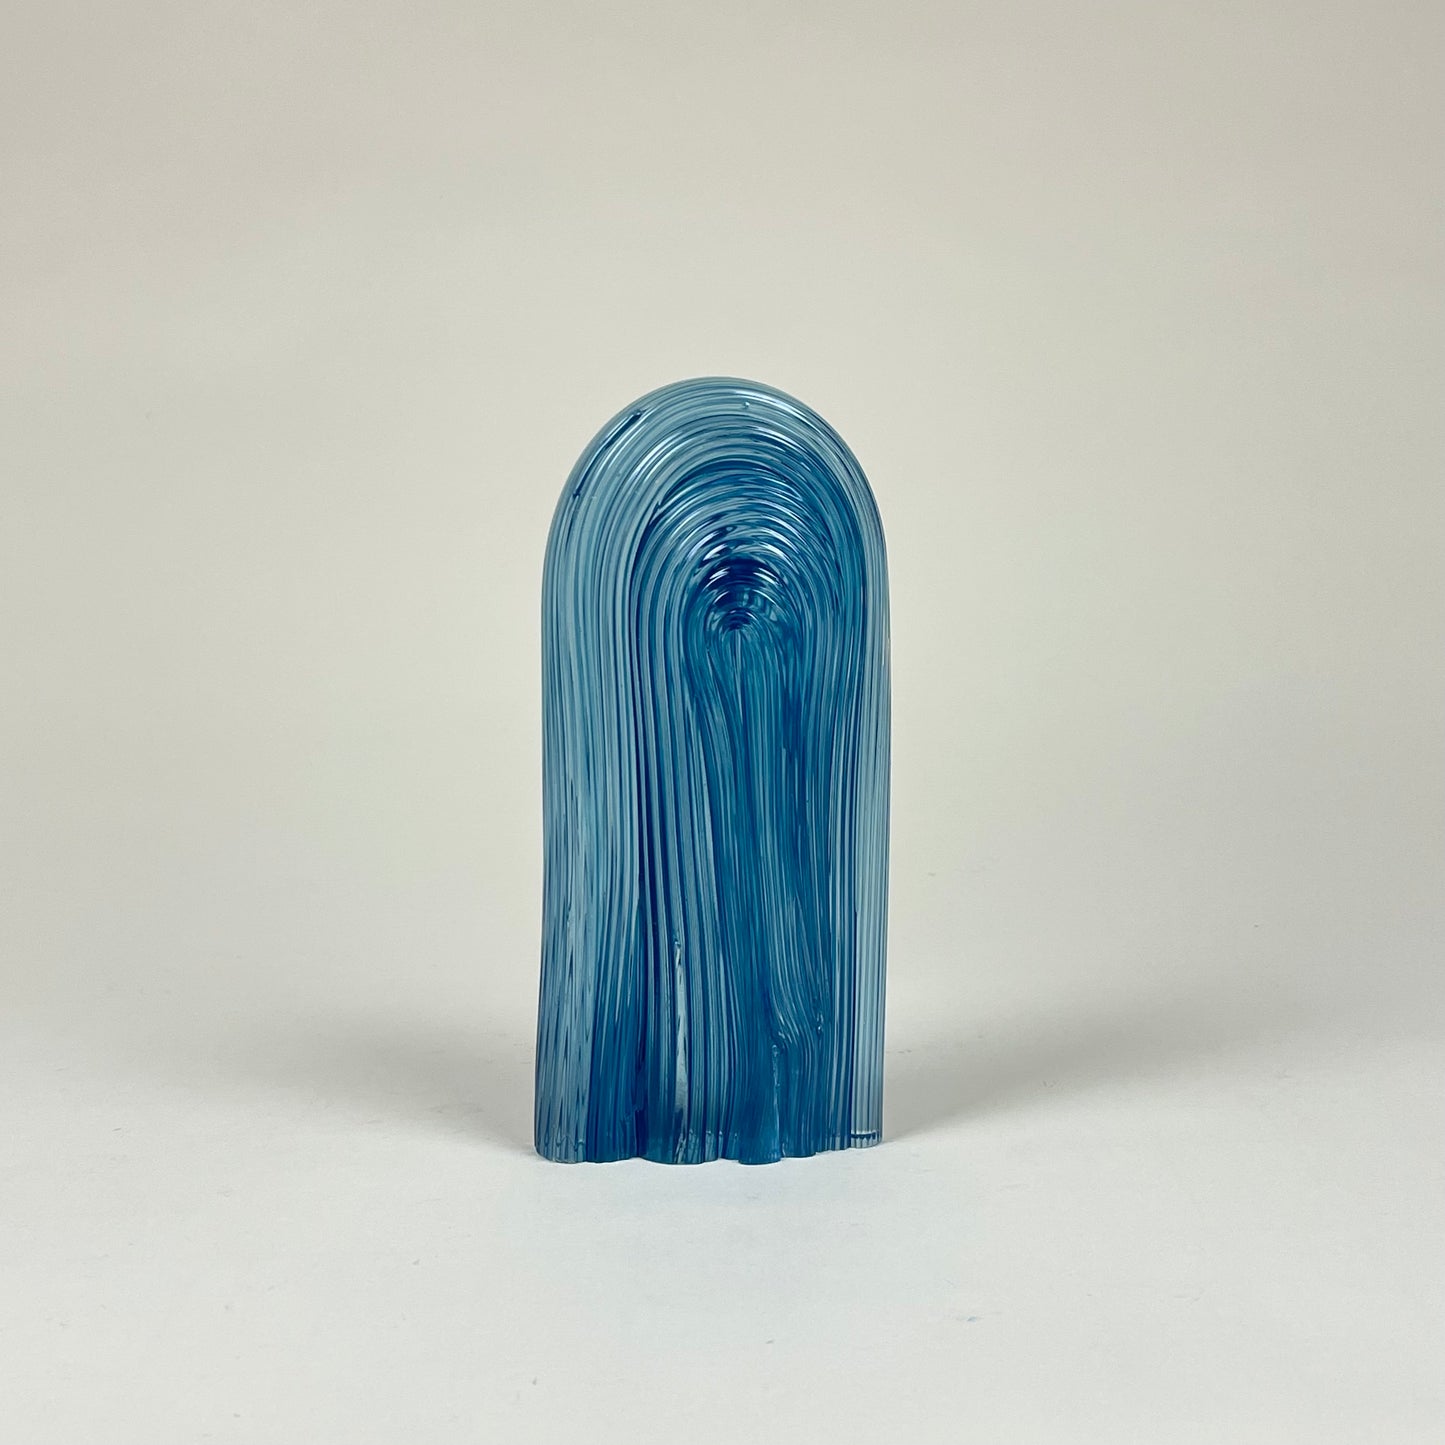 Blue scribble by glass sculpture by Rasmus Nossbring